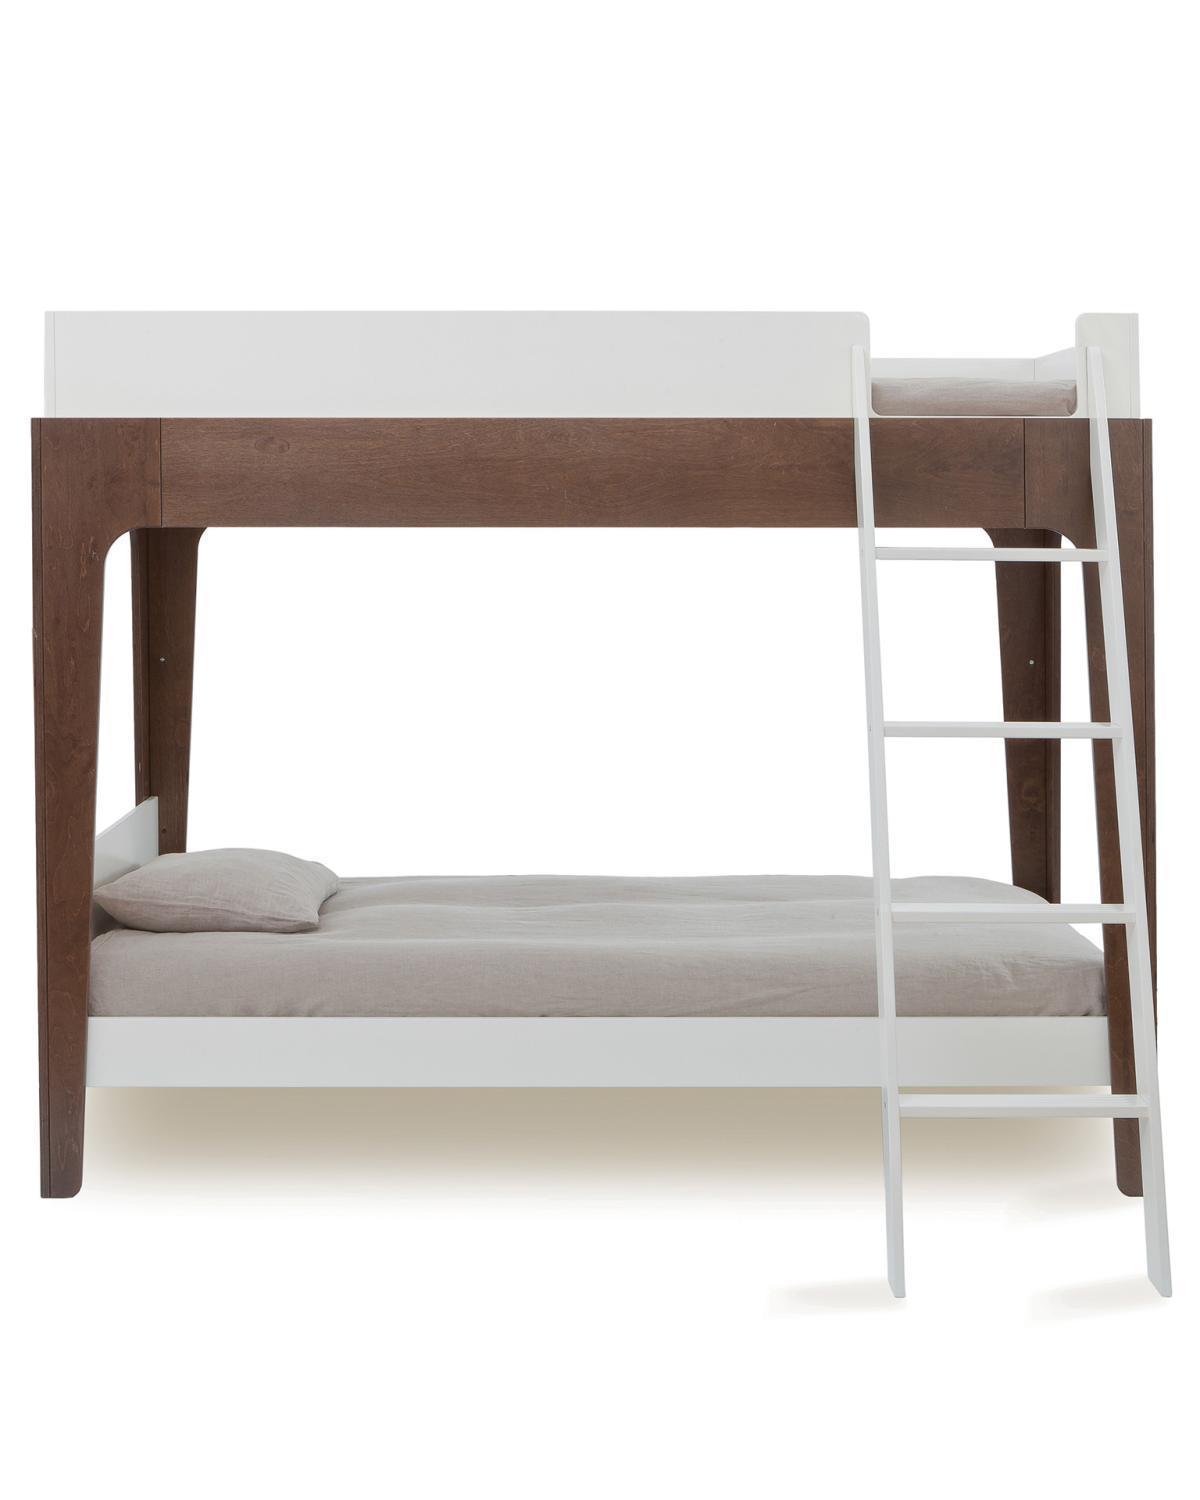 Little oeuf room perch bunk bed in walnut